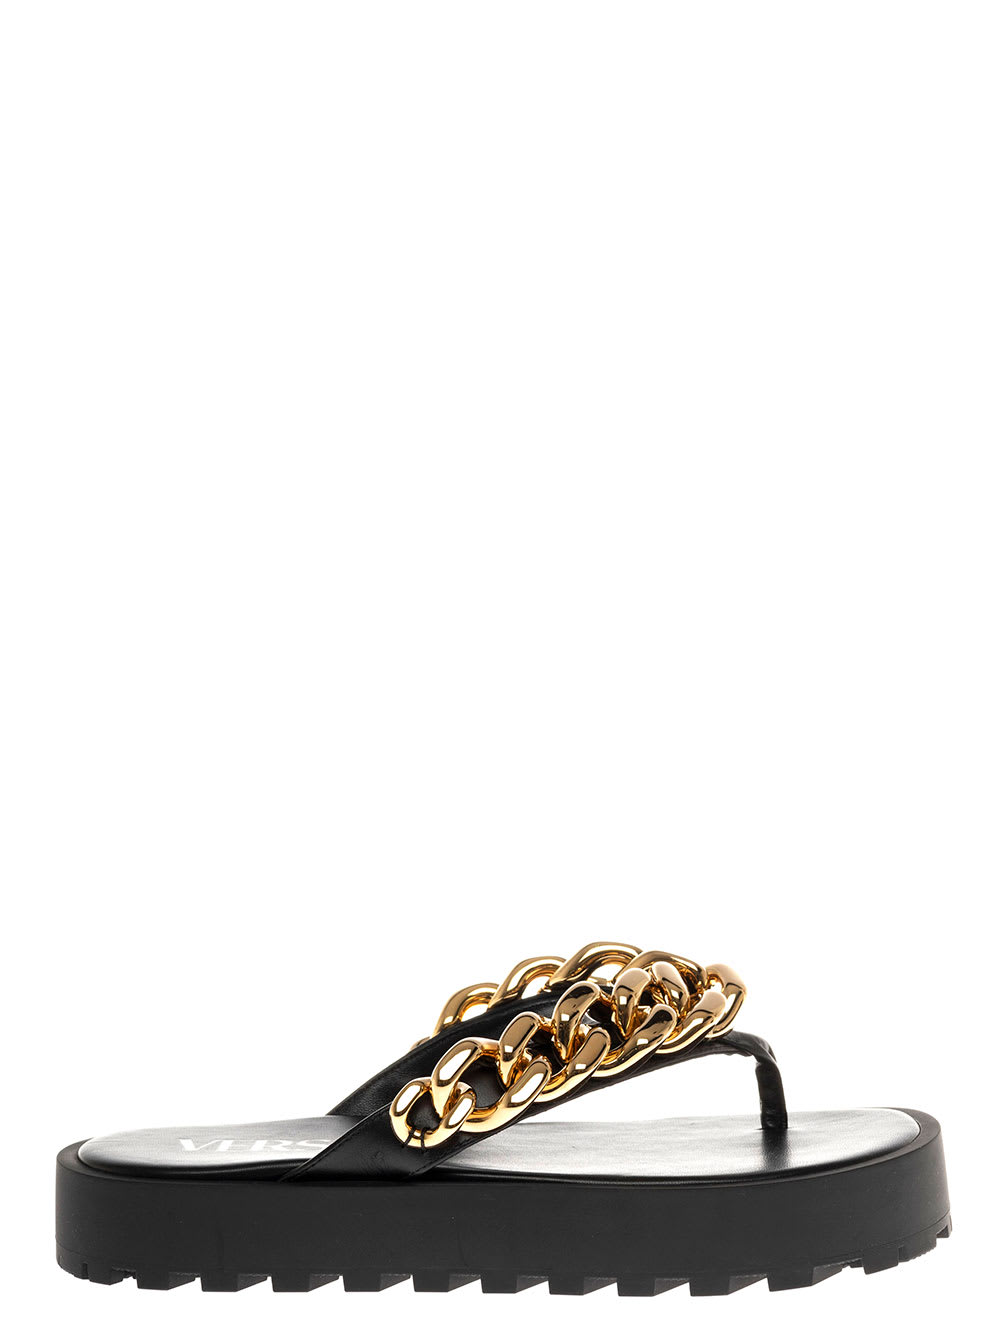 Versace Thong Sandals With Chain Detail